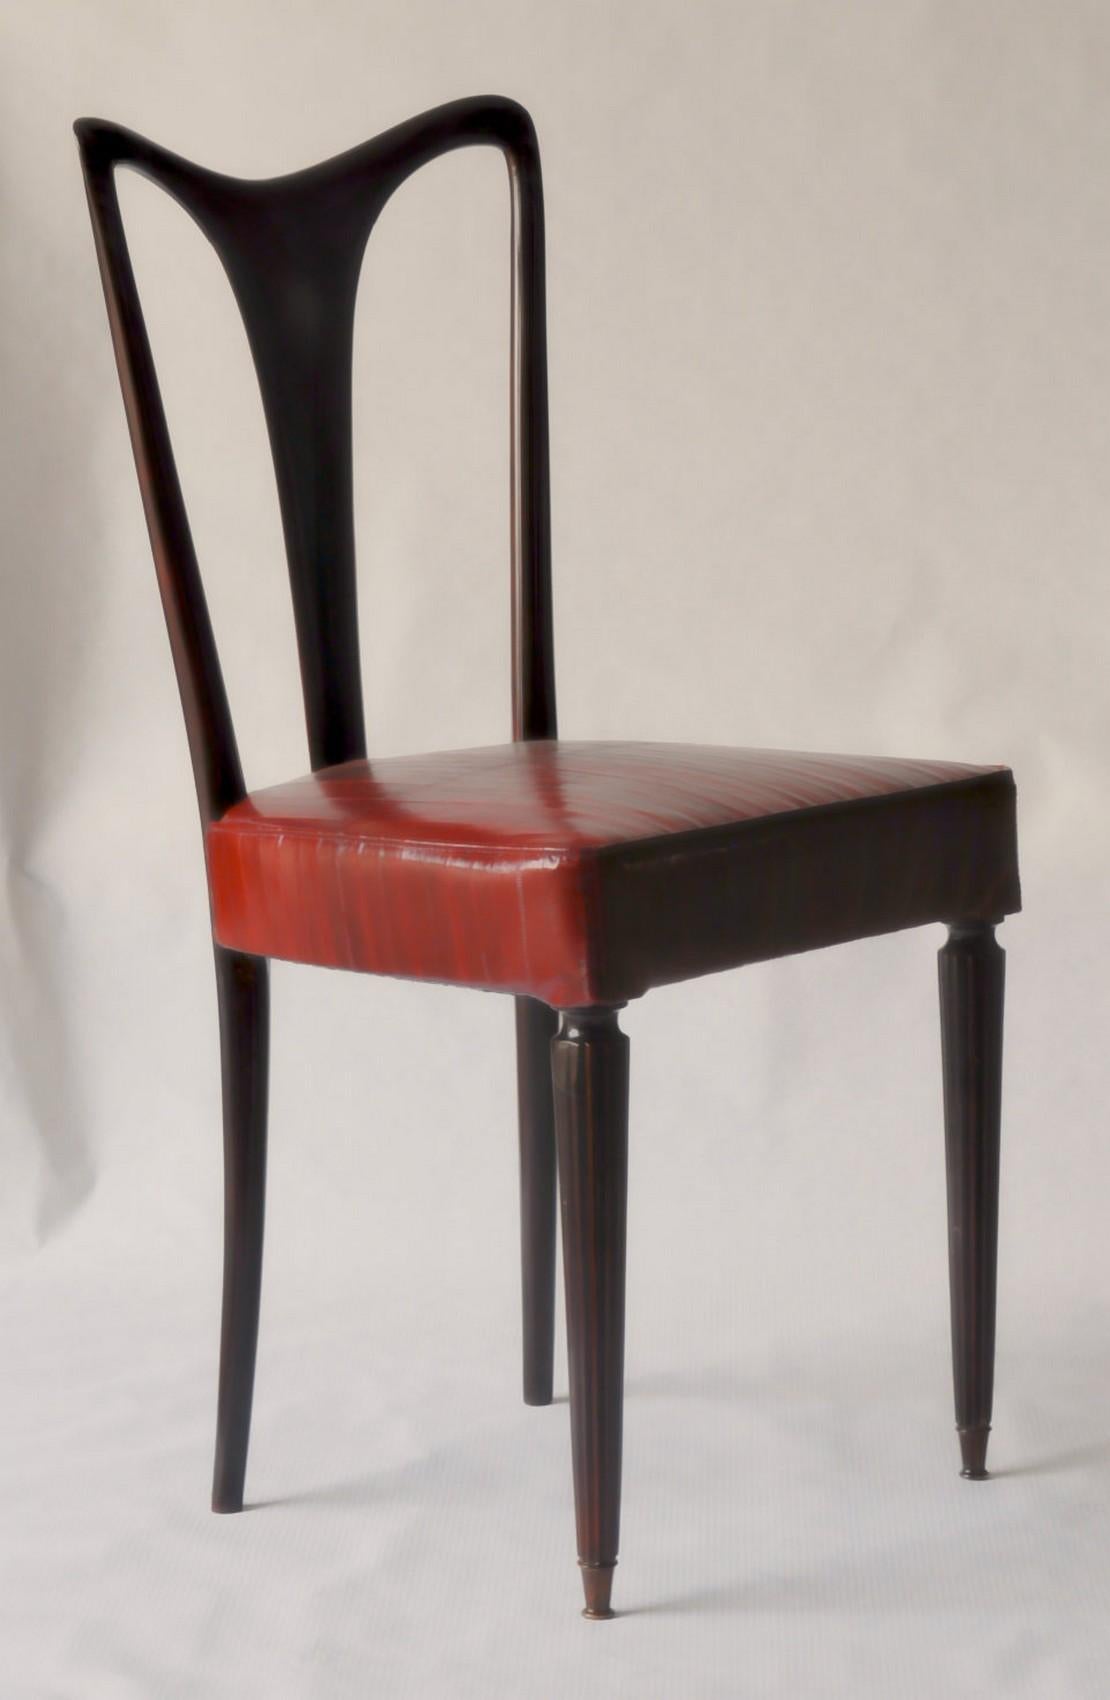 Velvet Guglielmo Ulrich Six Dining Chairs, Fully restored, Luxury Red Eel leather 40s